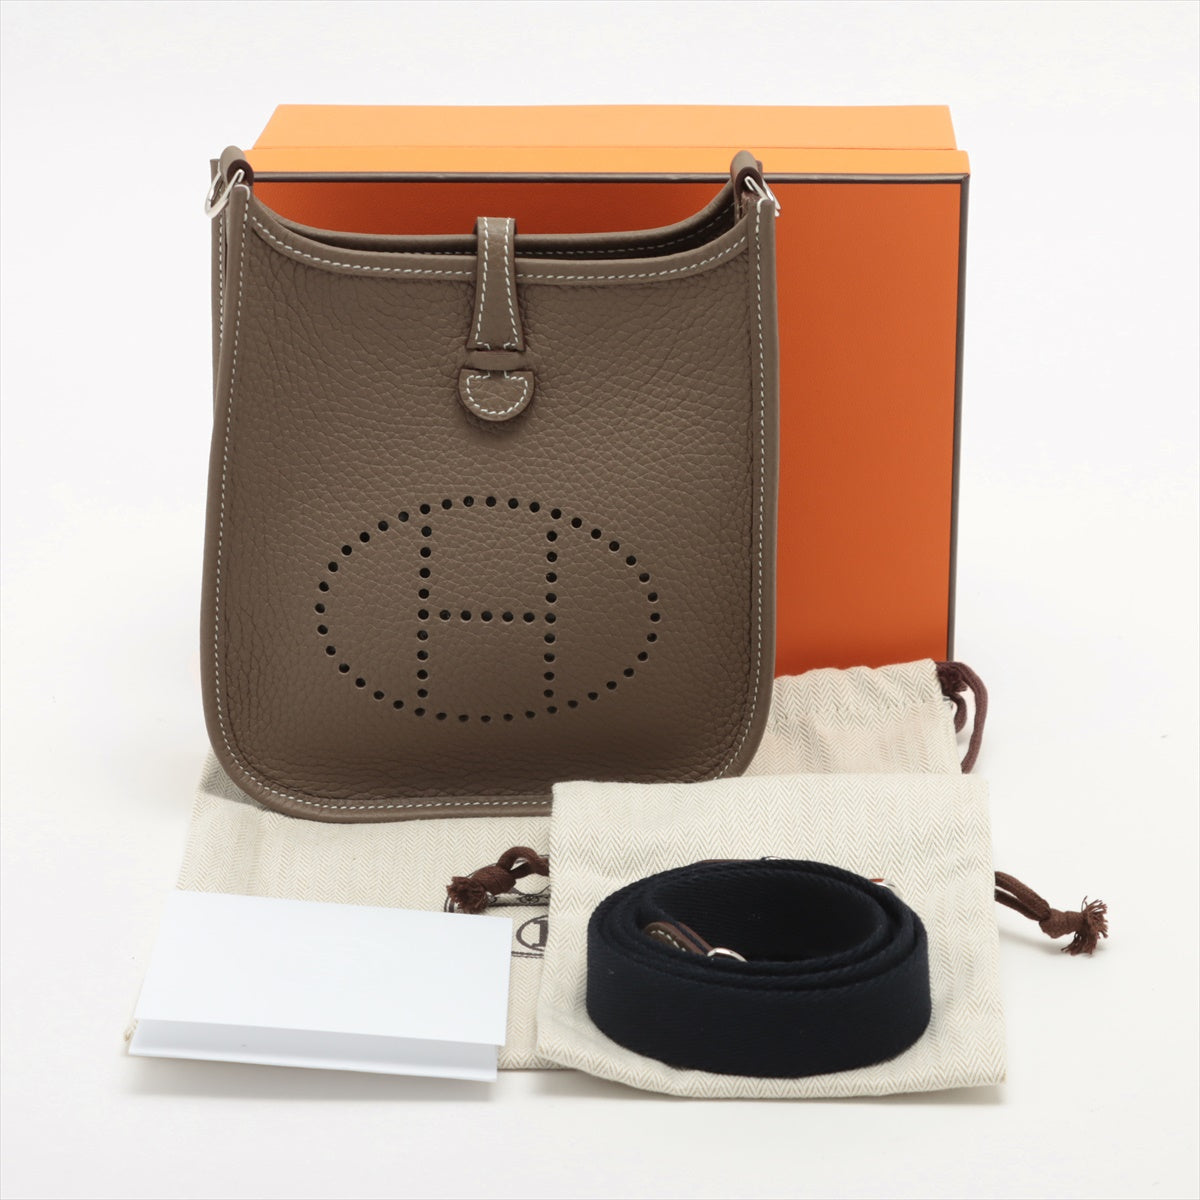 sold out. エルメス　Hermes エブリン tpm 新品正規品